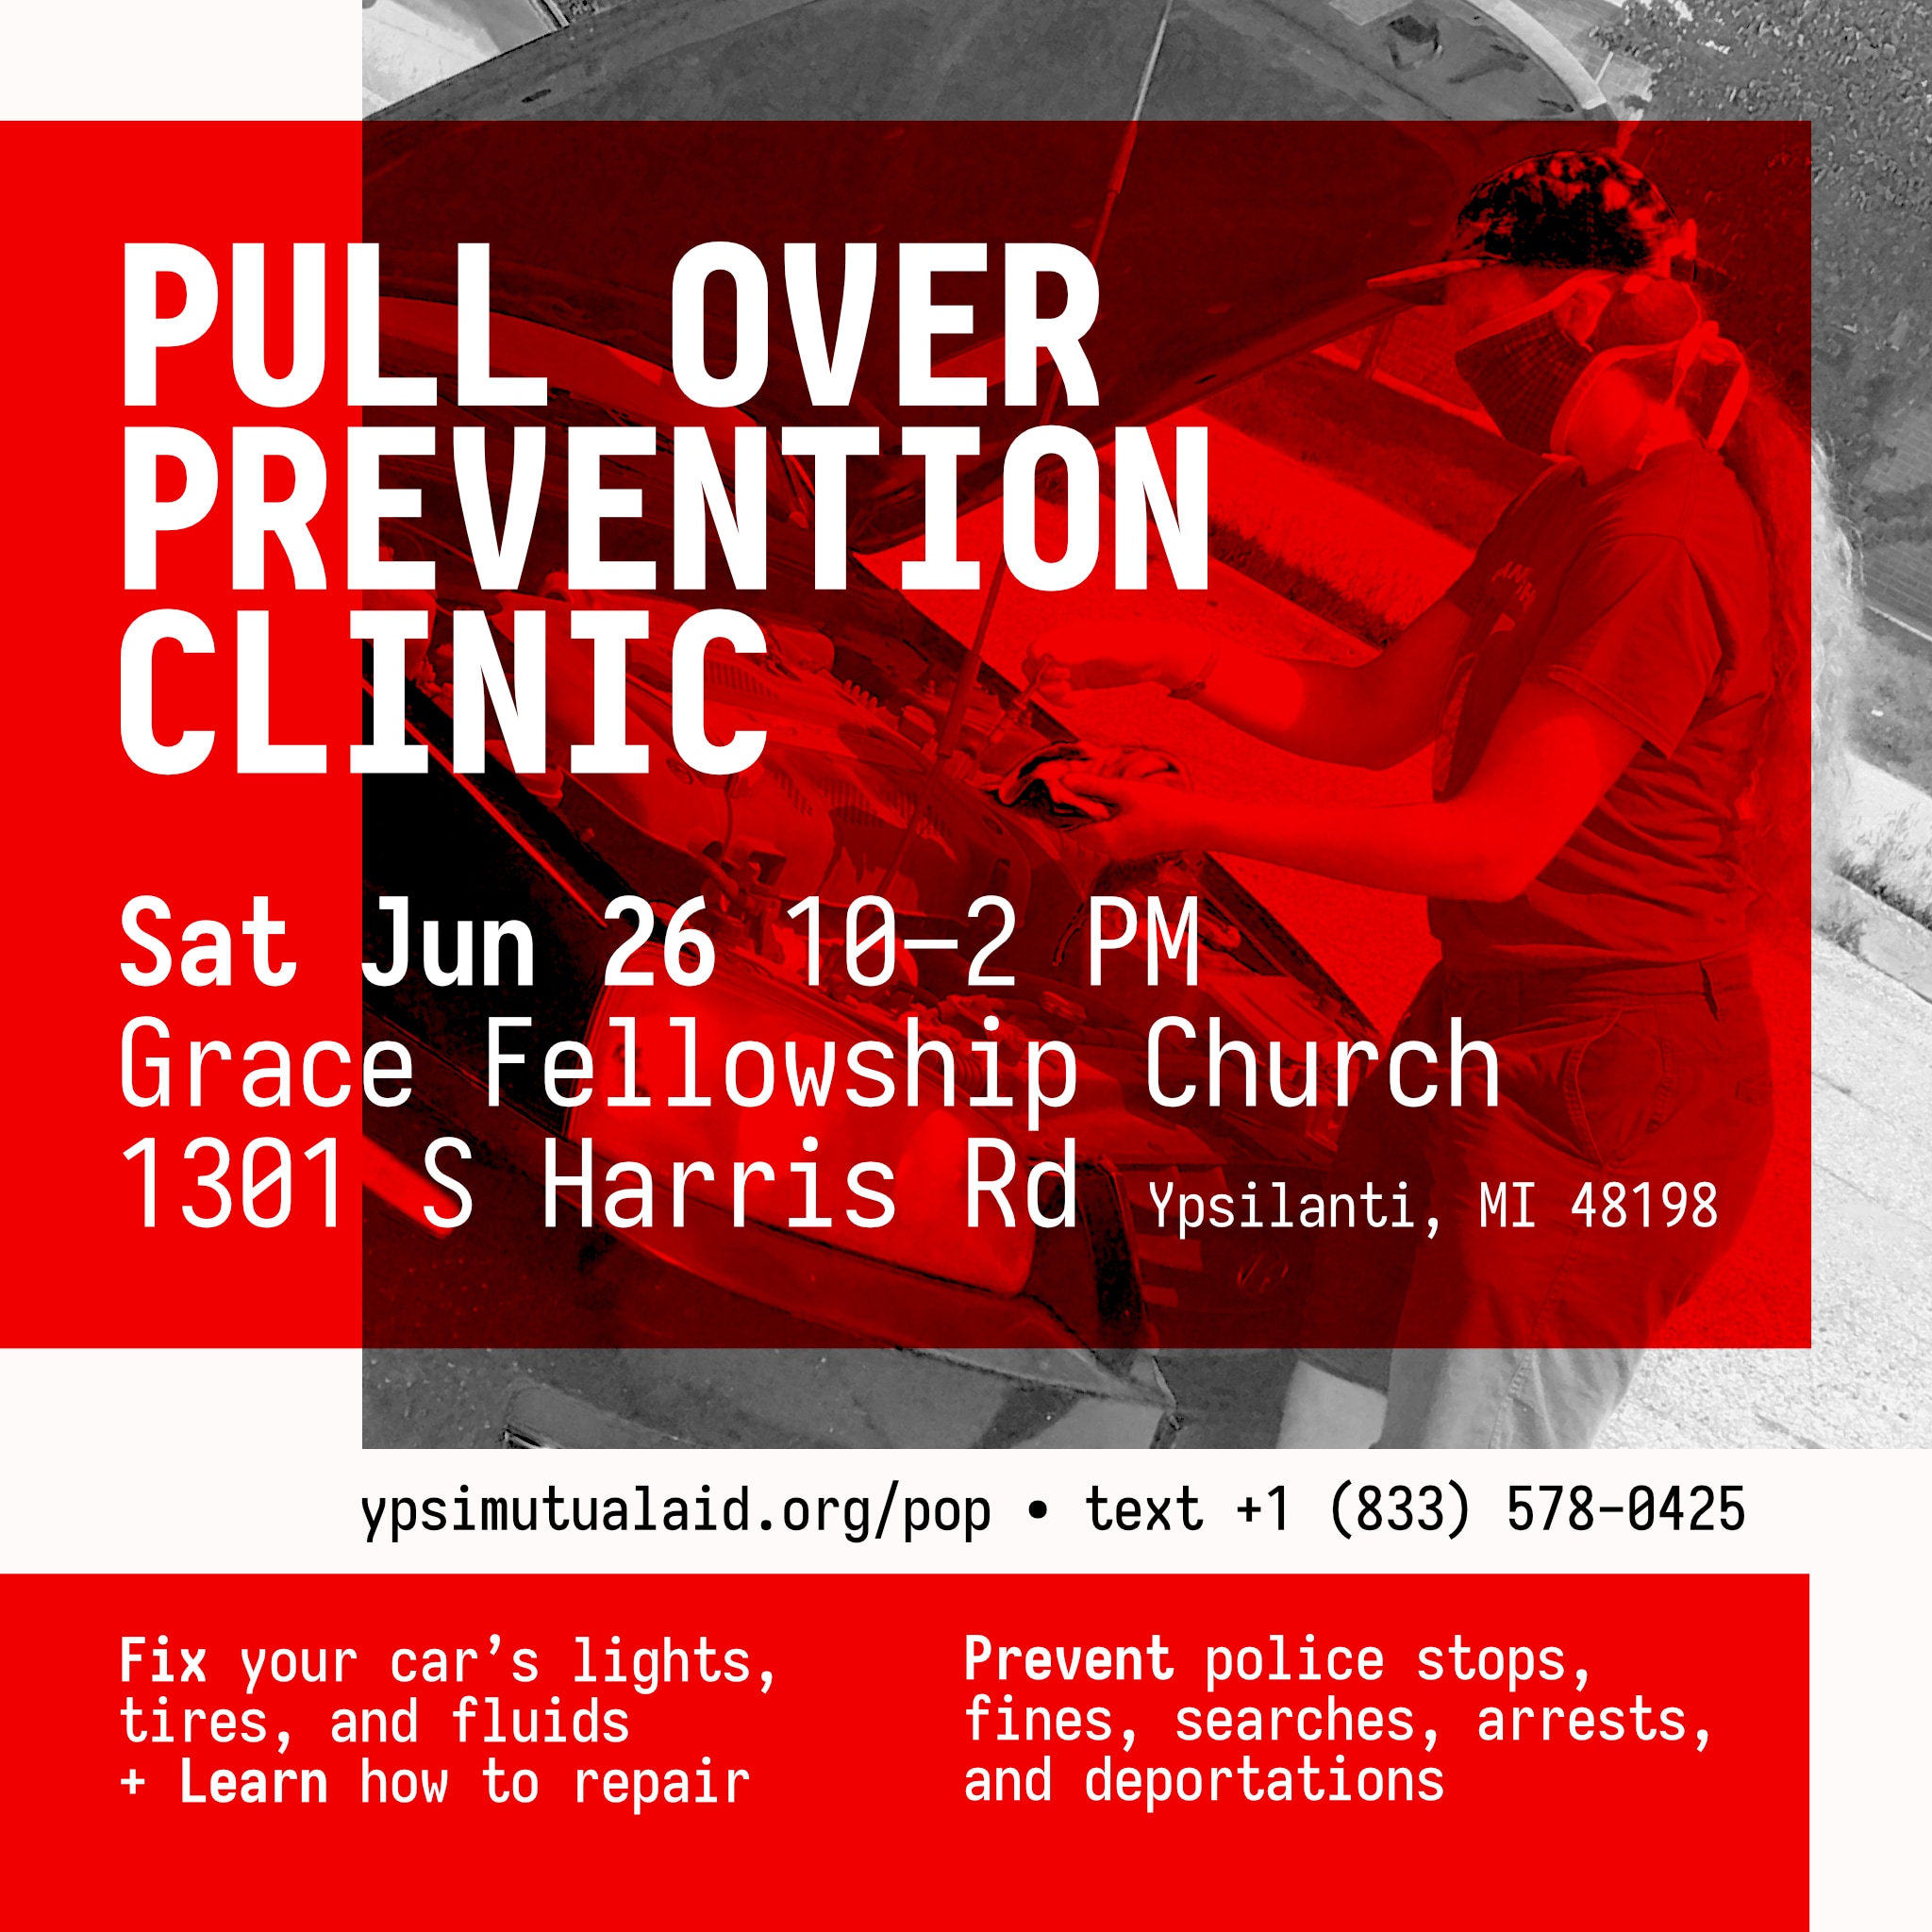 Shareable graphic for Pull Over Prevention Clinic, June 2021.